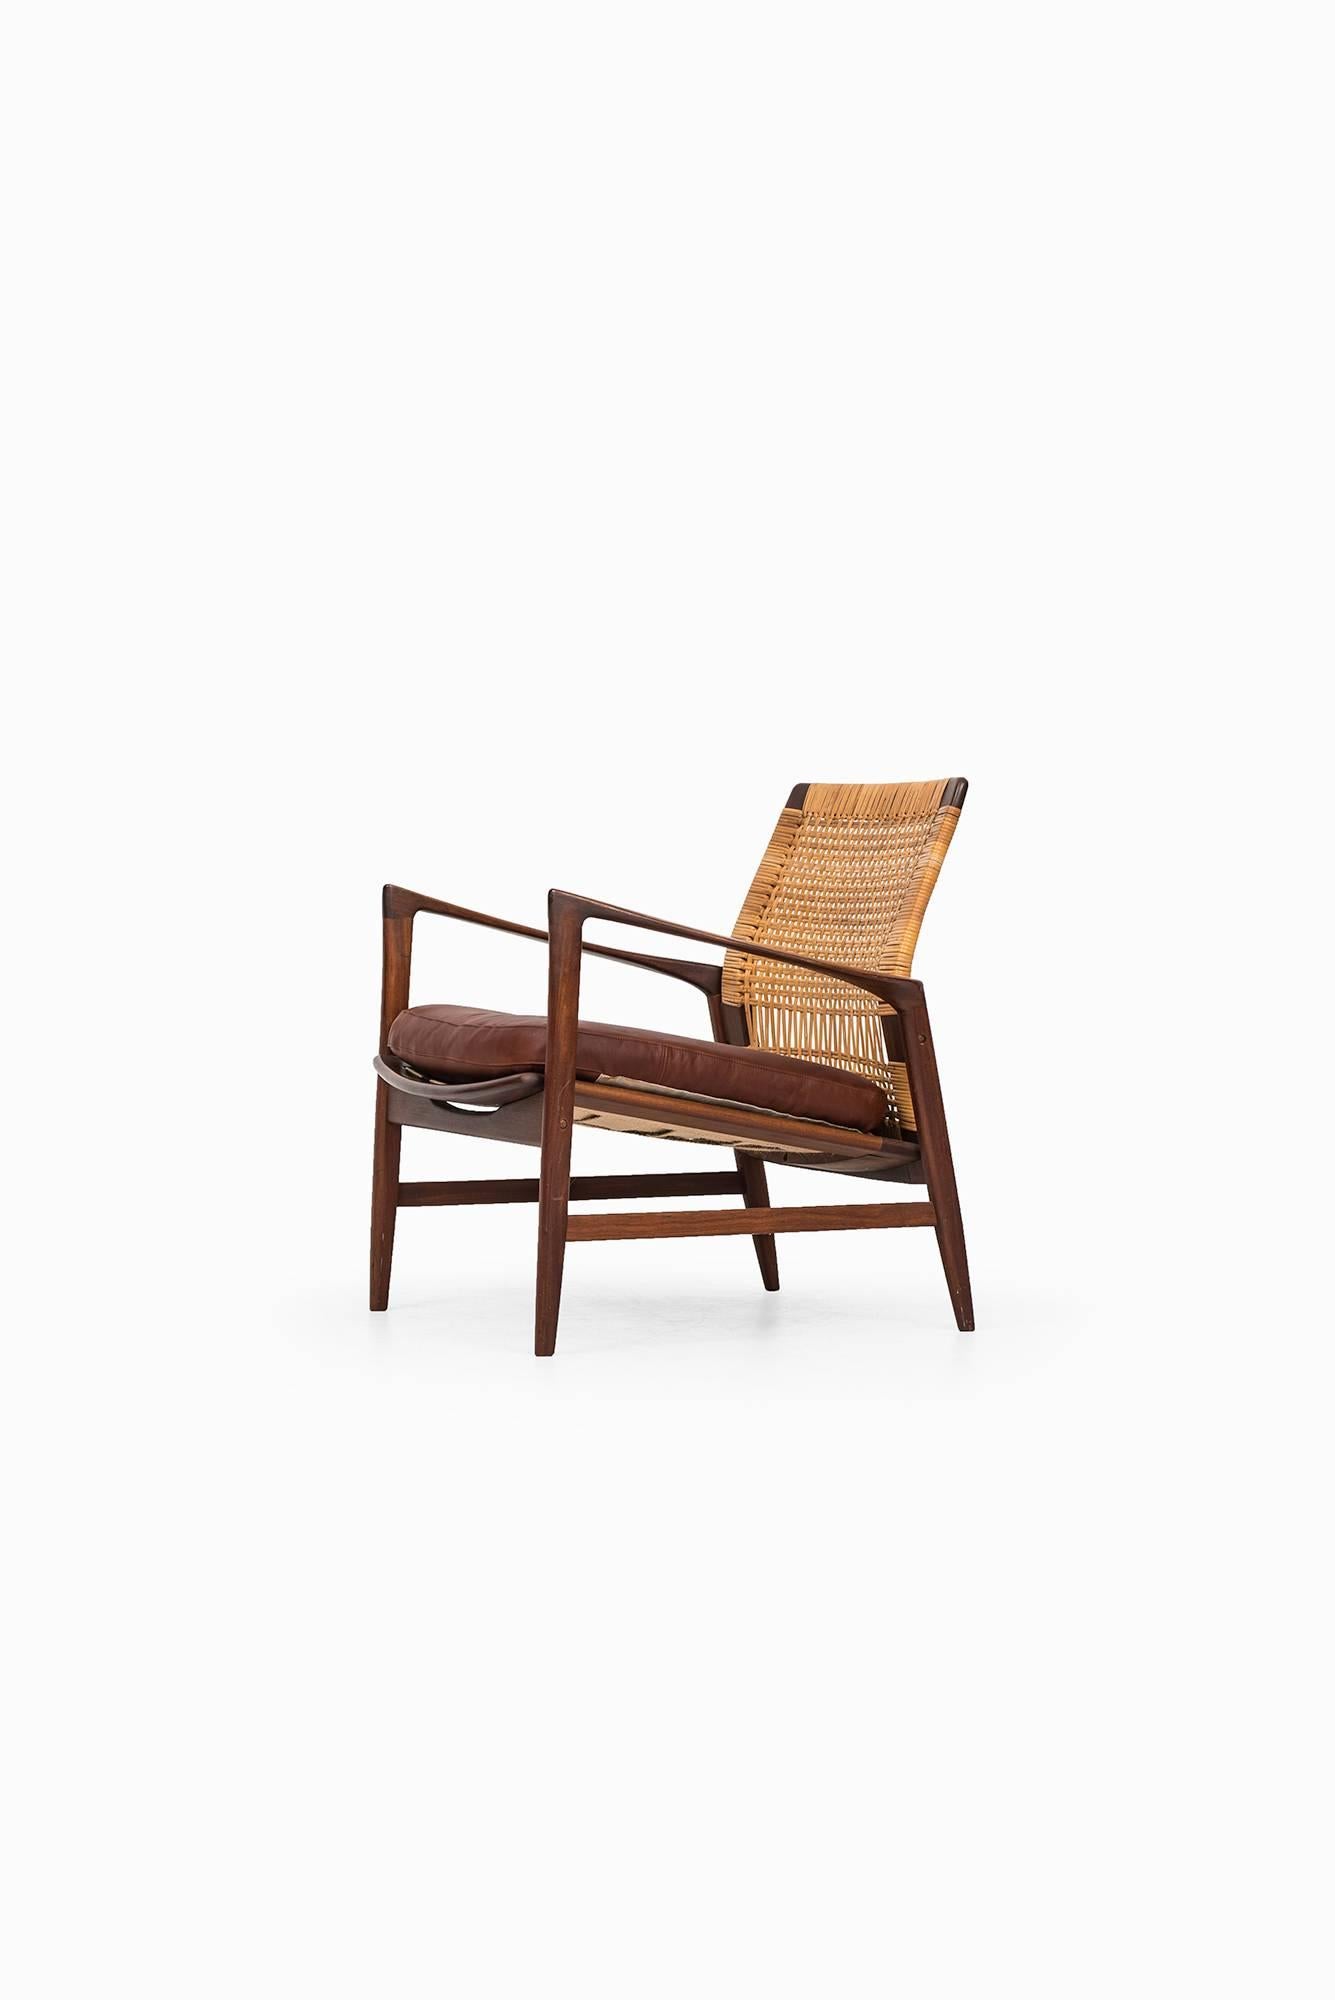 Rare easy chair model Åre designed by Ib Kofod-Larsen. Produced by OPE in Sweden.